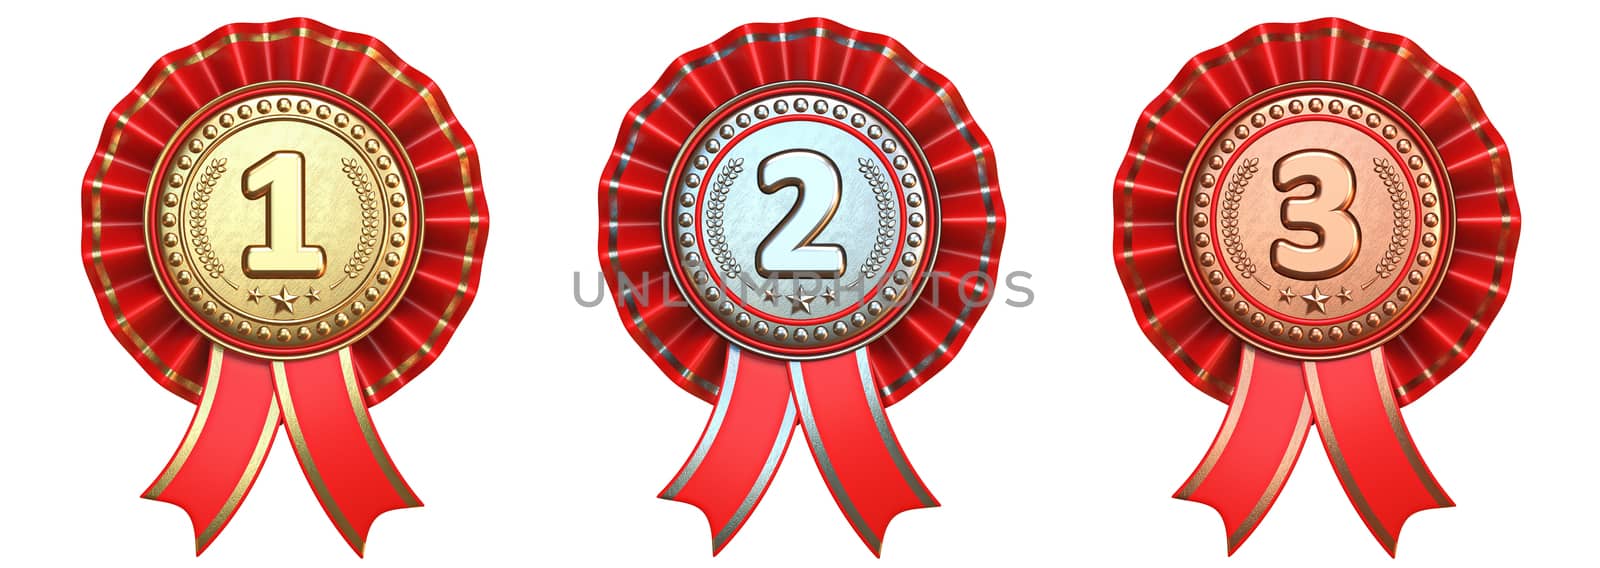 Medals with red ribbons 3D render illustration isolated on white background